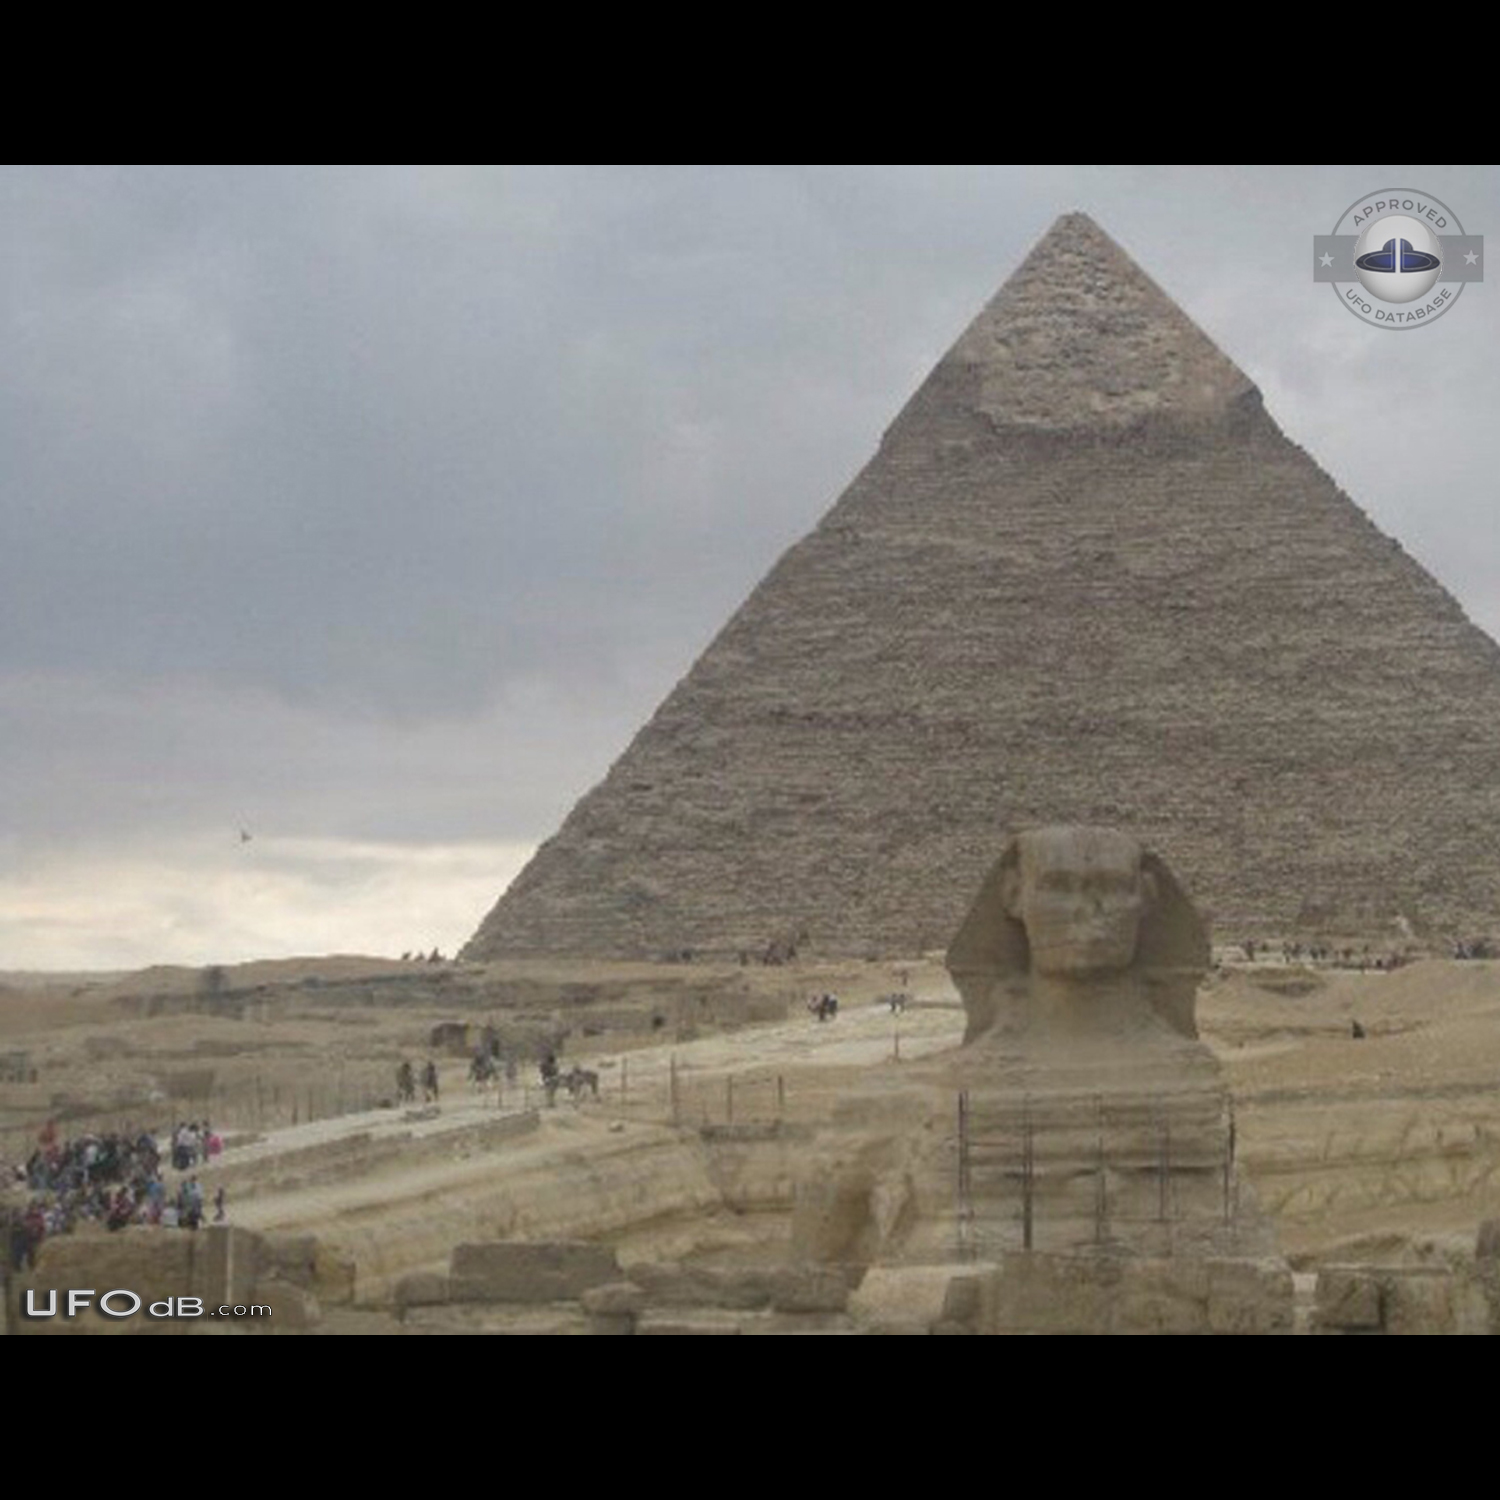 Picture reveal Triangular UFO on the left of a Pyramid in Egypt - 2011 UFO Picture #657-2